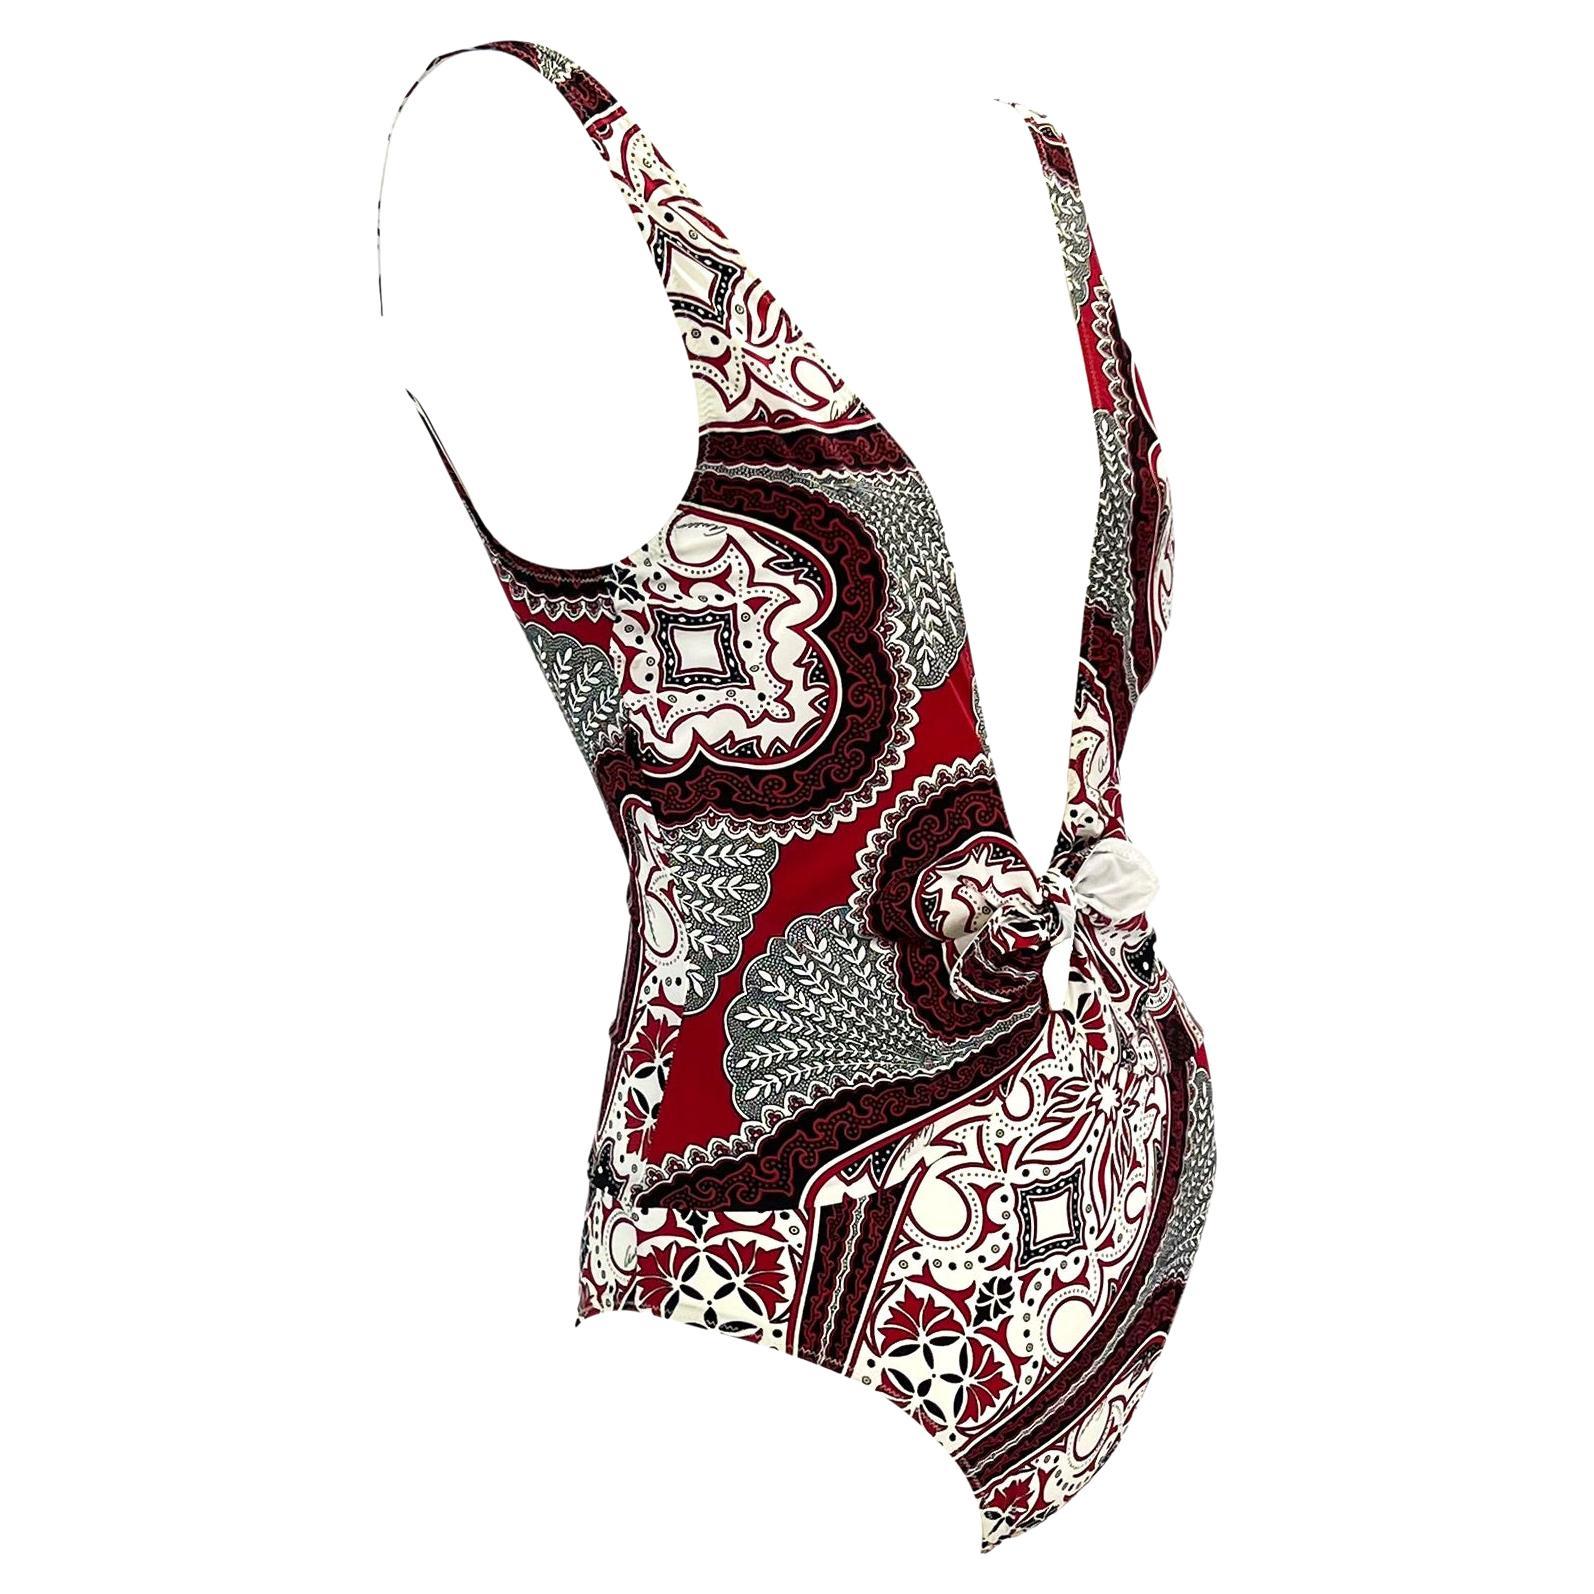 Presenting a red bandana print one piece Gucci swimsuit, designed by Tom Ford. From the 2004 cruise collection, this ultra sexy one piece features a plunging neckline with a small bow as well as a low exposed back. Nearly 20 years old and unused,